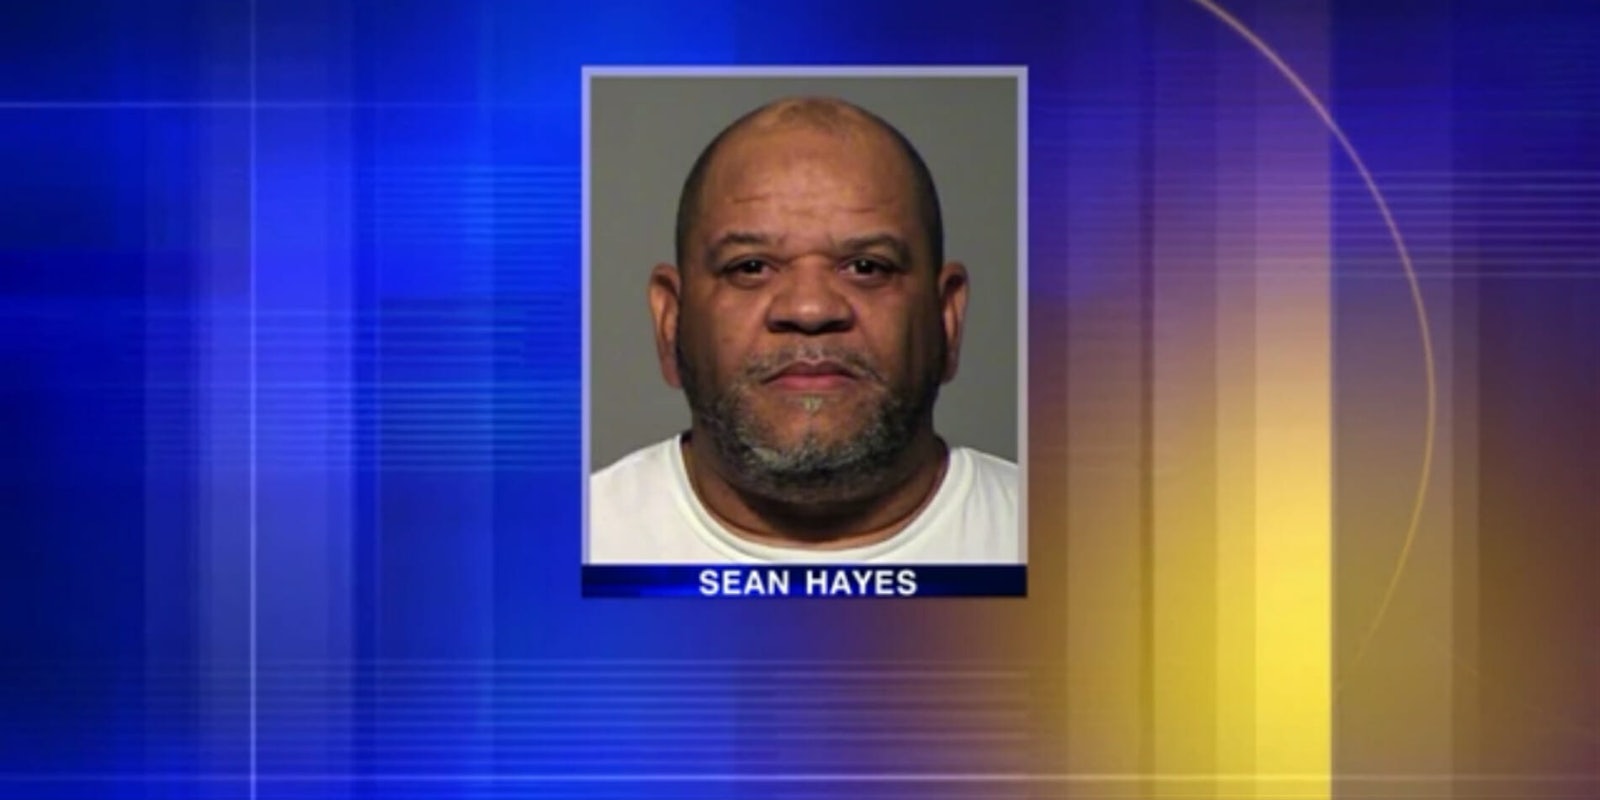 A 50-year-old Milwaukee man was arrested on sex trafficking charges after his mom told authorities.